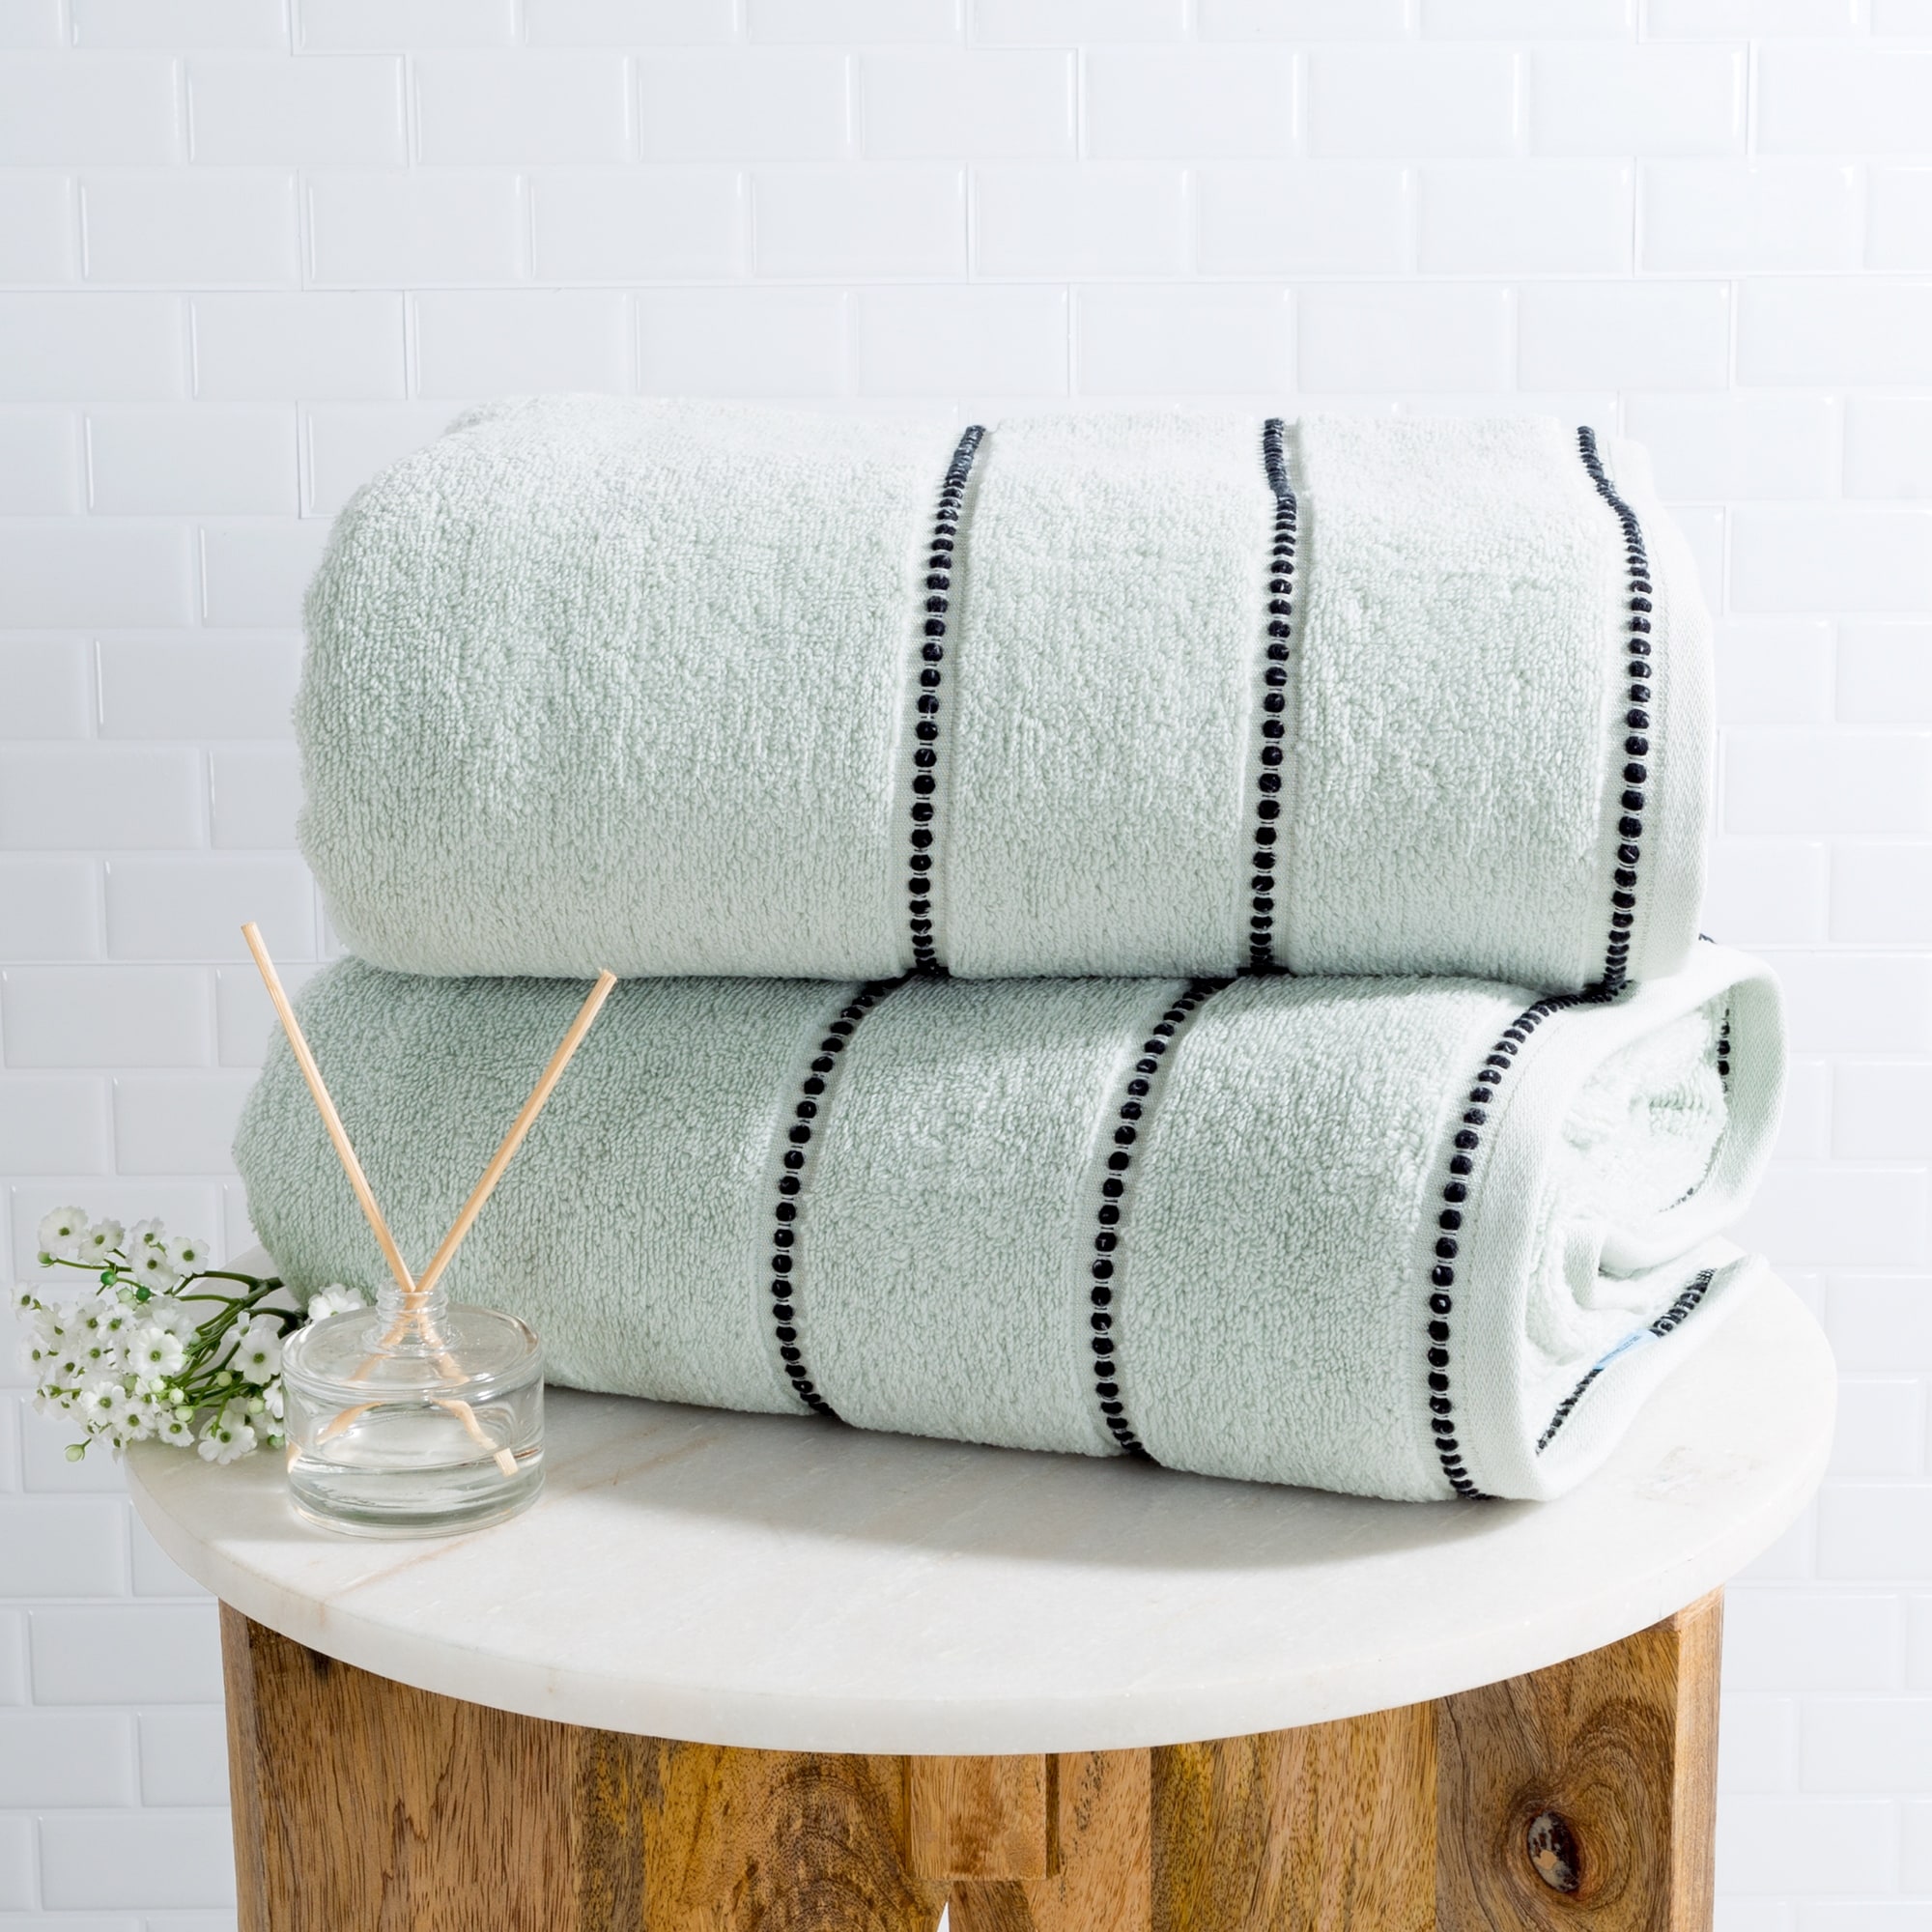 https://ak1.ostkcdn.com/images/products/is/images/direct/773d145e300a7638a7c00932371b9609704b2670/2-Piece-Luxury-Cotton-Towel-Set---Quick-Drying-100%25-Zero-Twist-Cotton-Bath-Towels-by-Windsor-Home.jpg